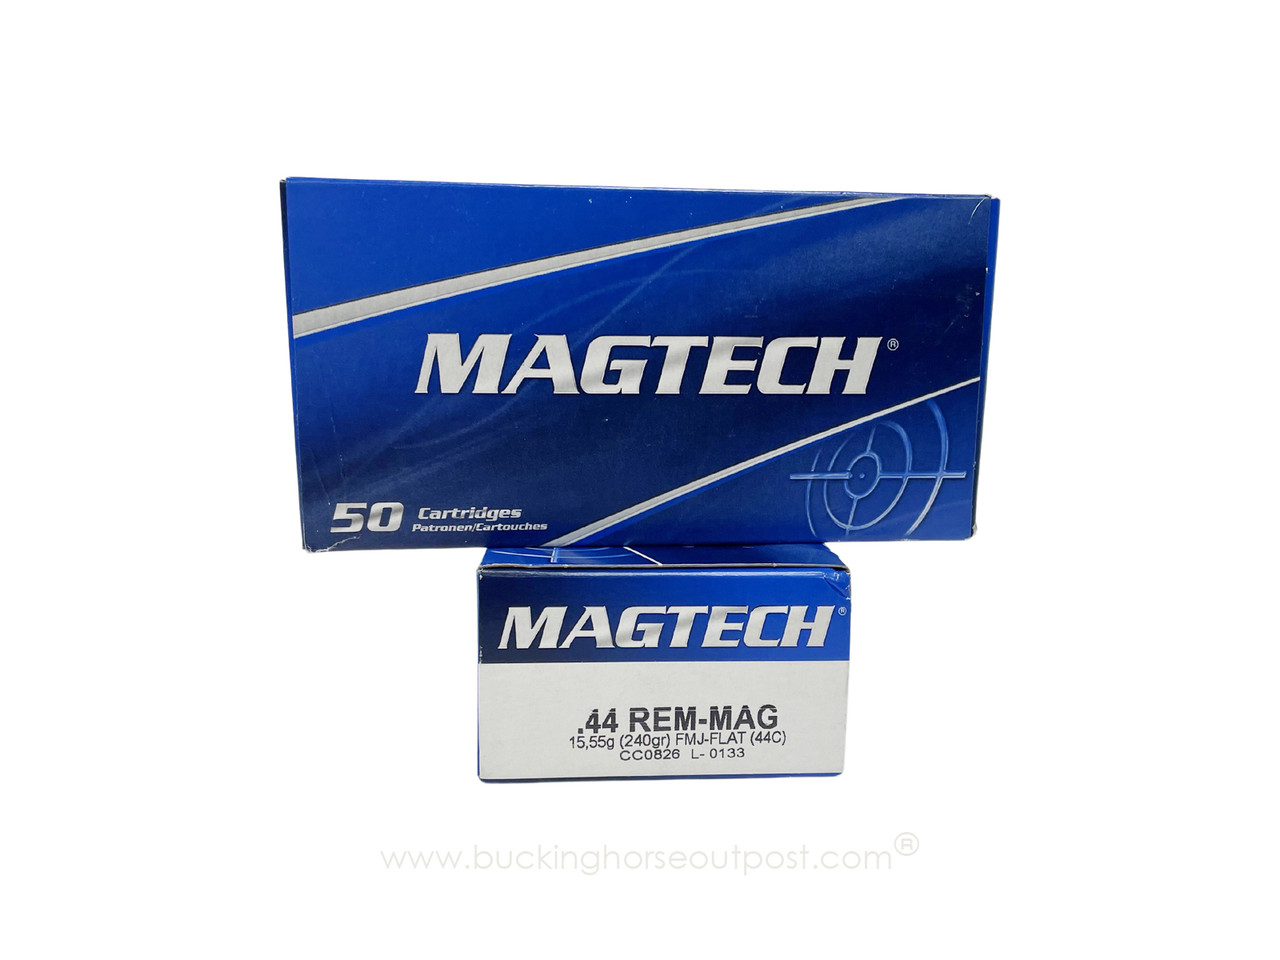 Magtech .44 Remington Magnum 240 Grain Full Metal Jacket 50rds Per Box (44A) - FREE SHIPPING ON ORDERS OVER $175